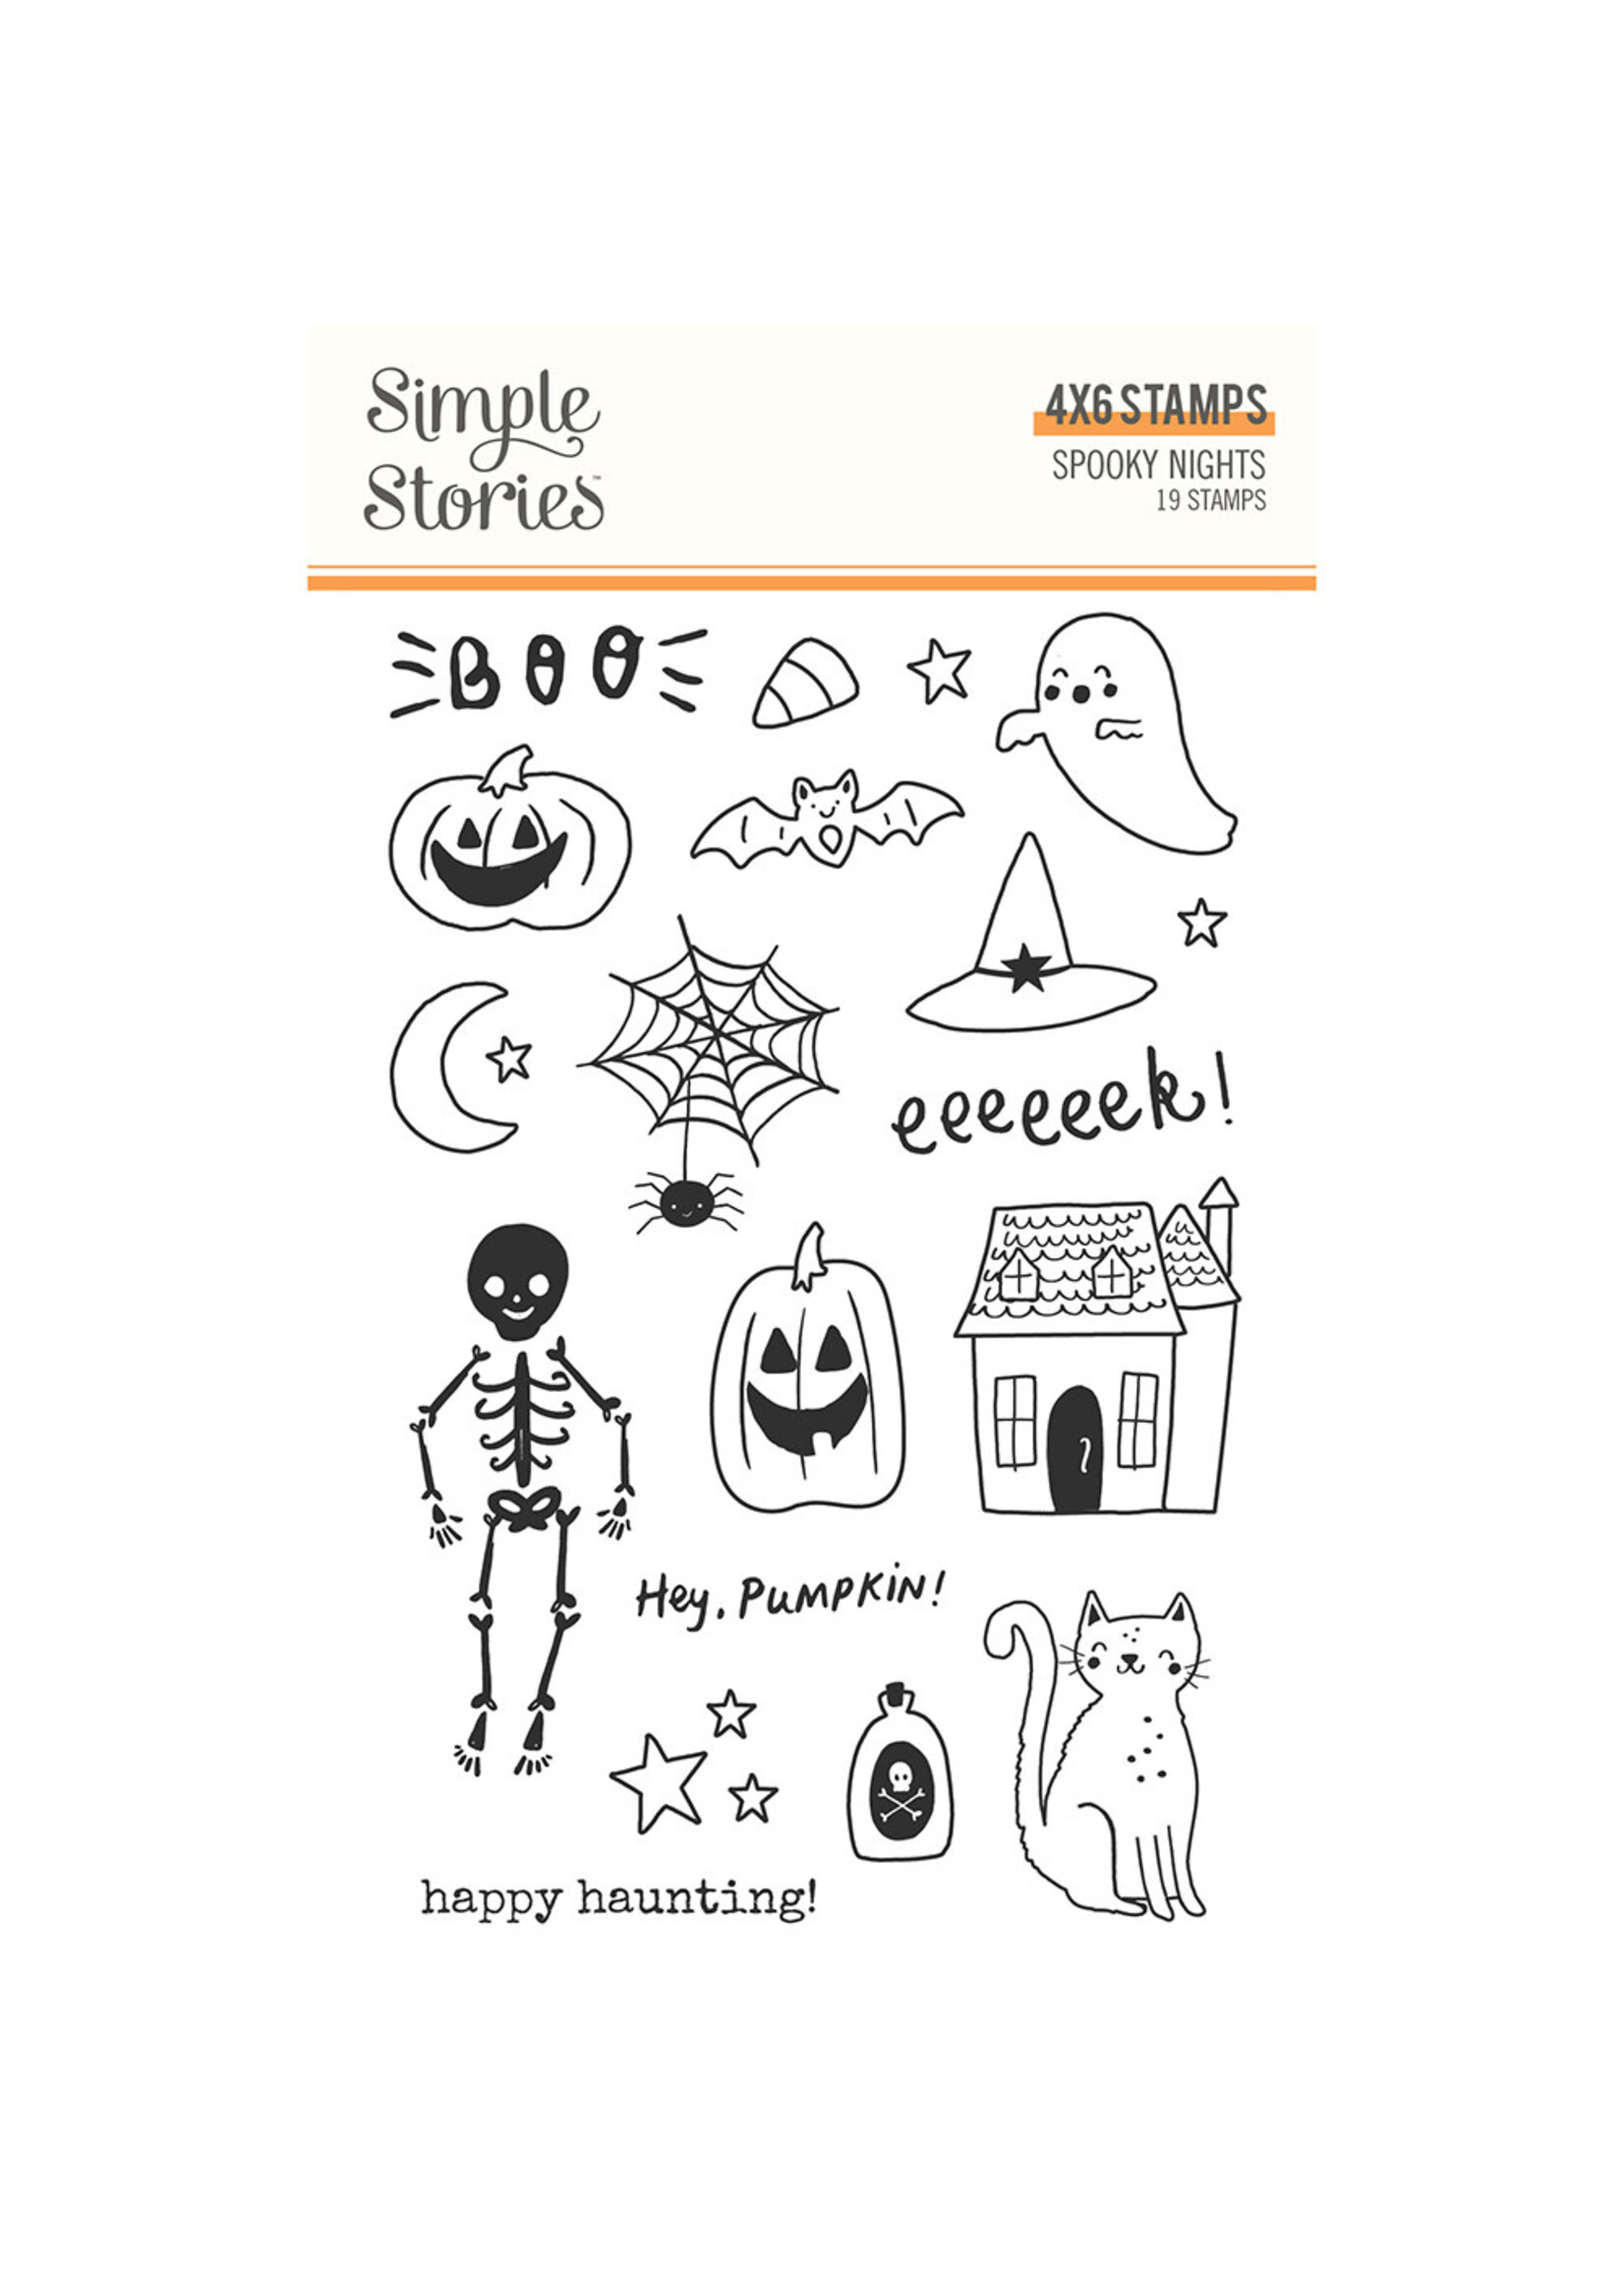 Simple Stories Spooky Nights - Stamps